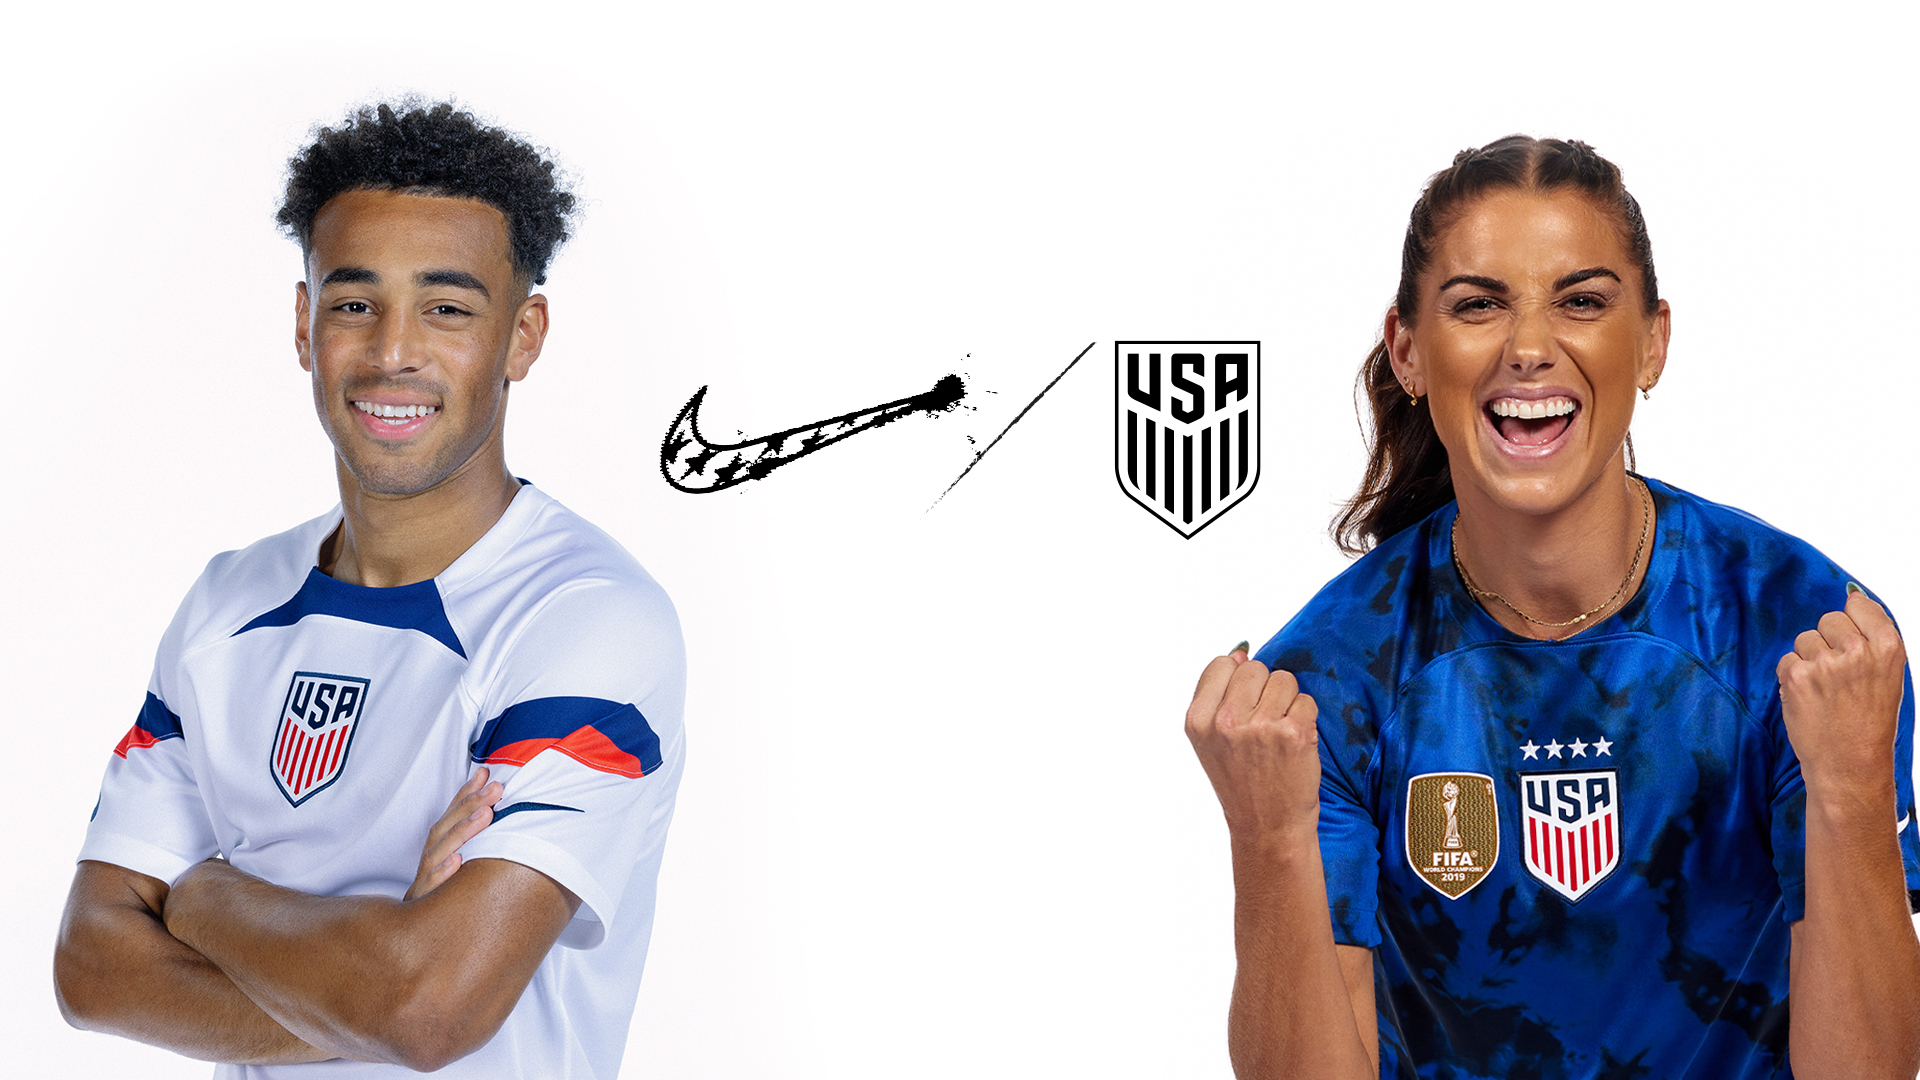 United States Home Kit 2022 - World Cup 2022